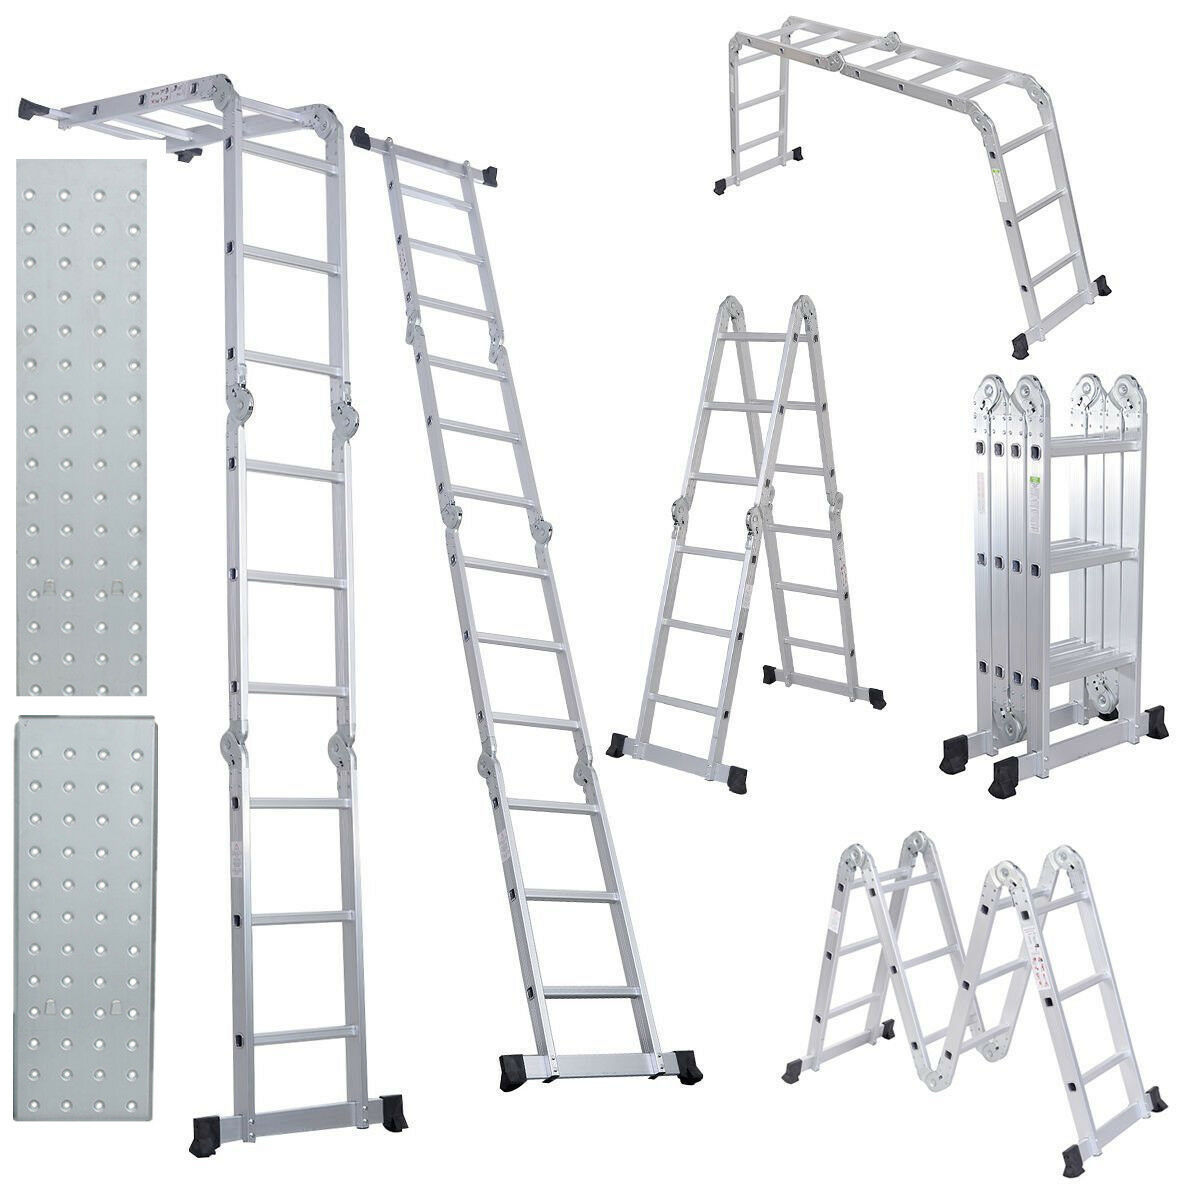 12.5ft Extension Multifunction Aluminum Folding Step Ladder Scaffold W/2 Plates